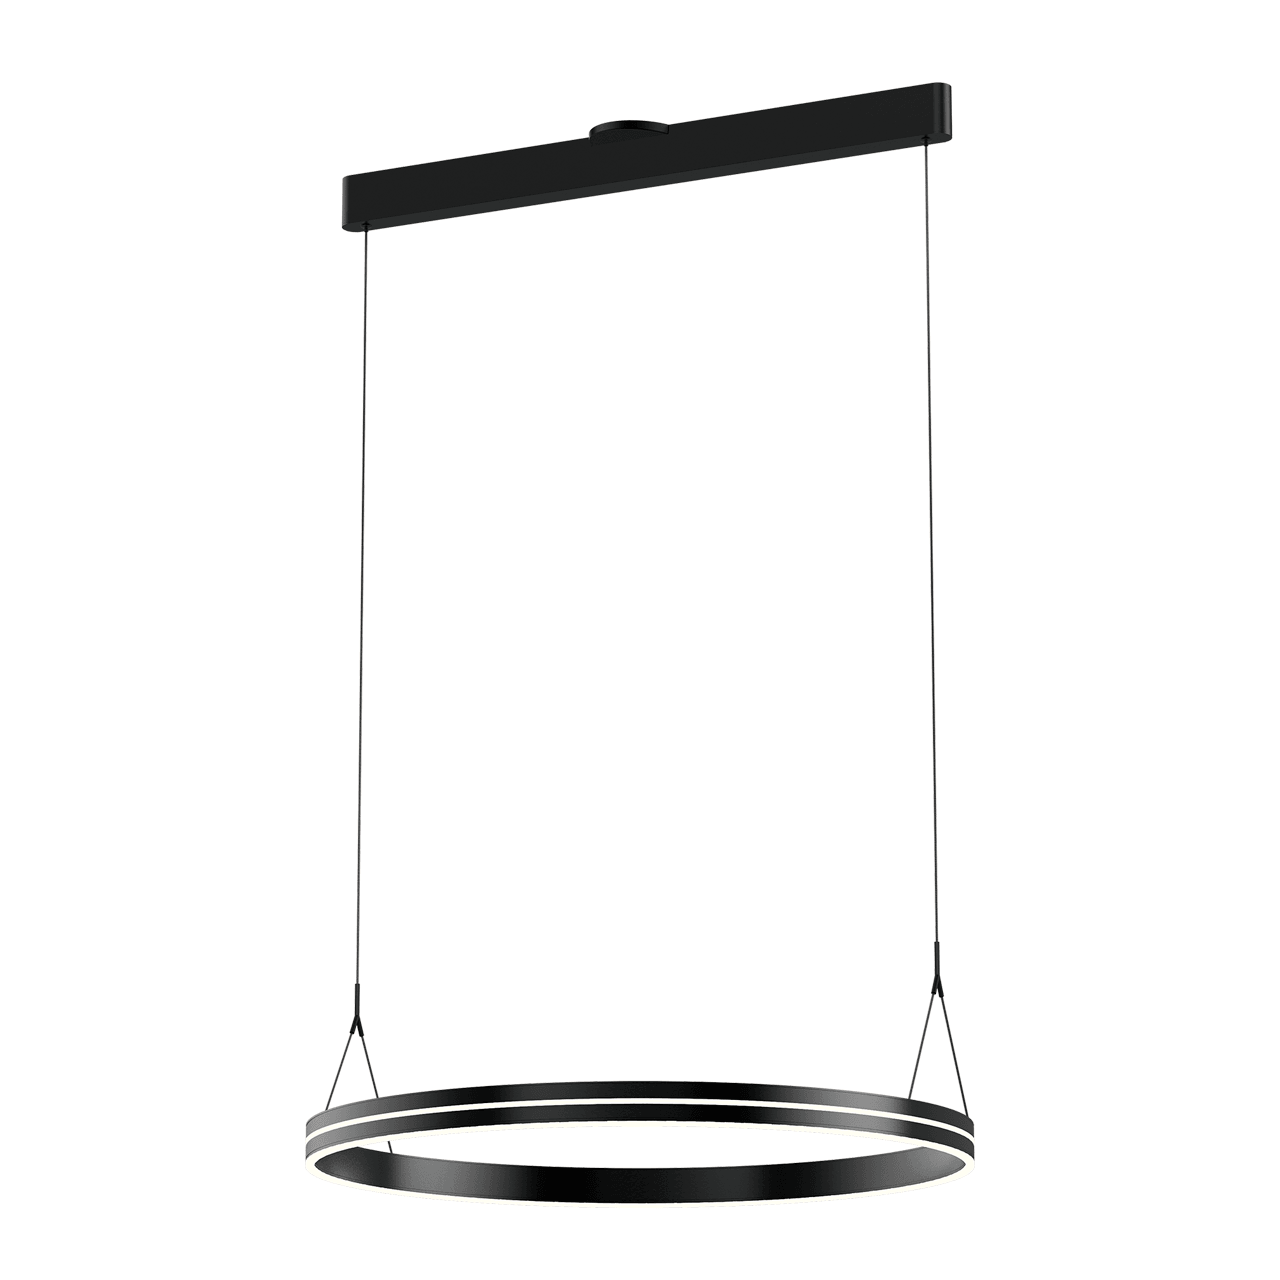 Pageone - Athena (Large Single Ring). Chandelier - Hbdepot